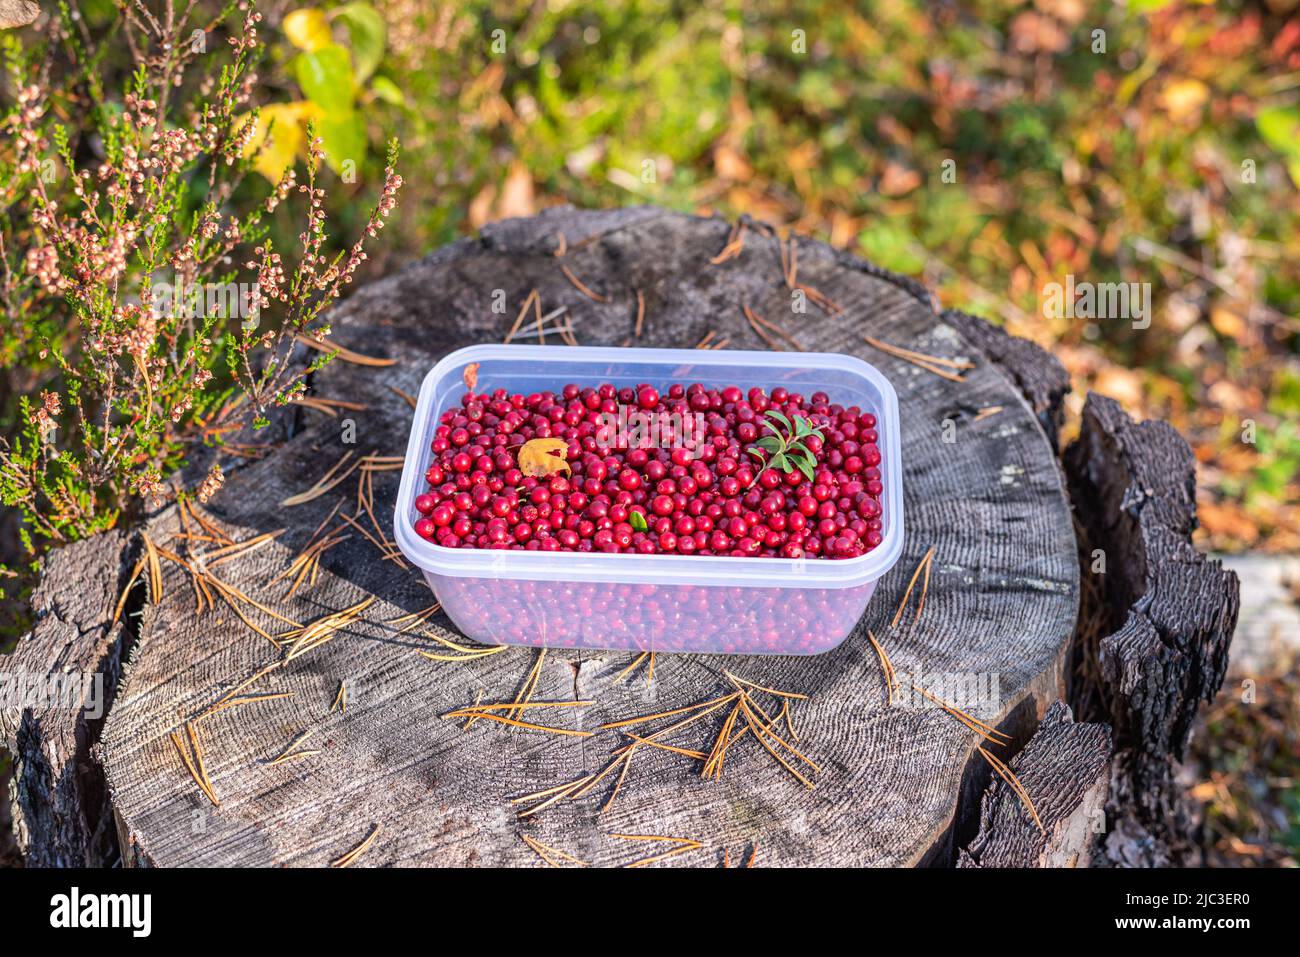 Lingonberries in a transparent plastic box on a stump in the forest. Foraging in the woods. Stock Photo